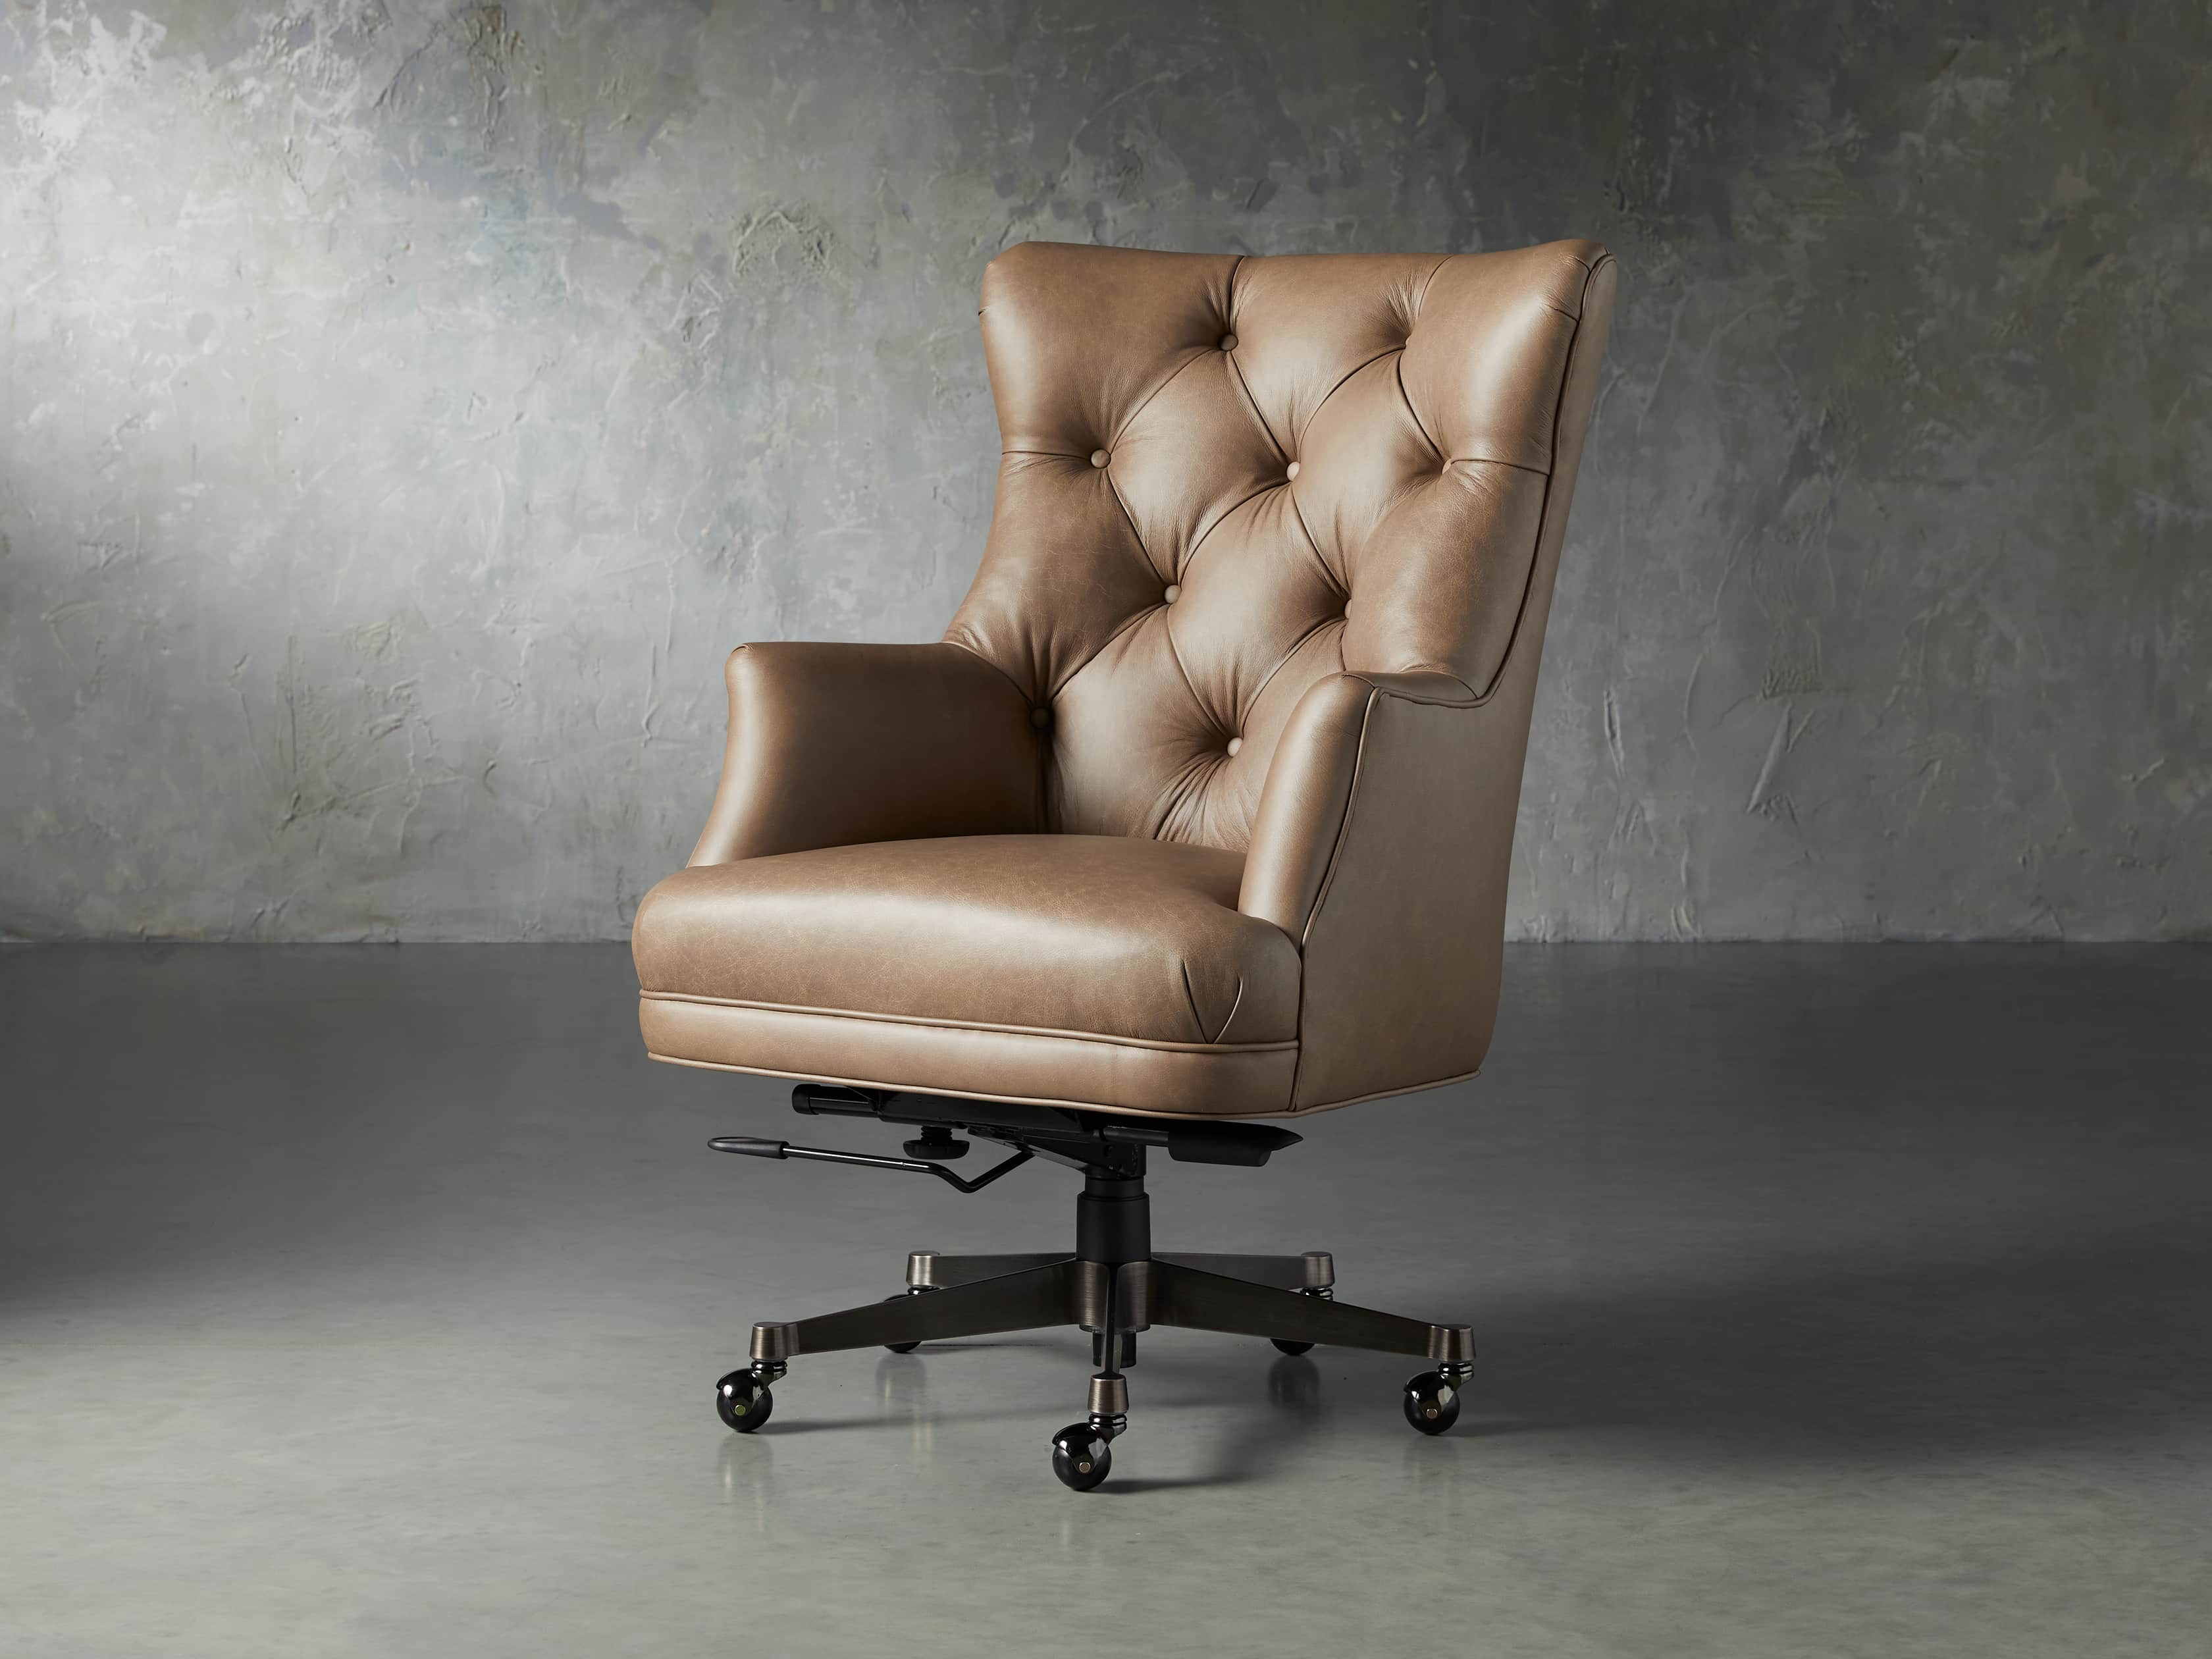 Addy Leather Desk Chair Arhaus, Tufted Leather Desk Chair